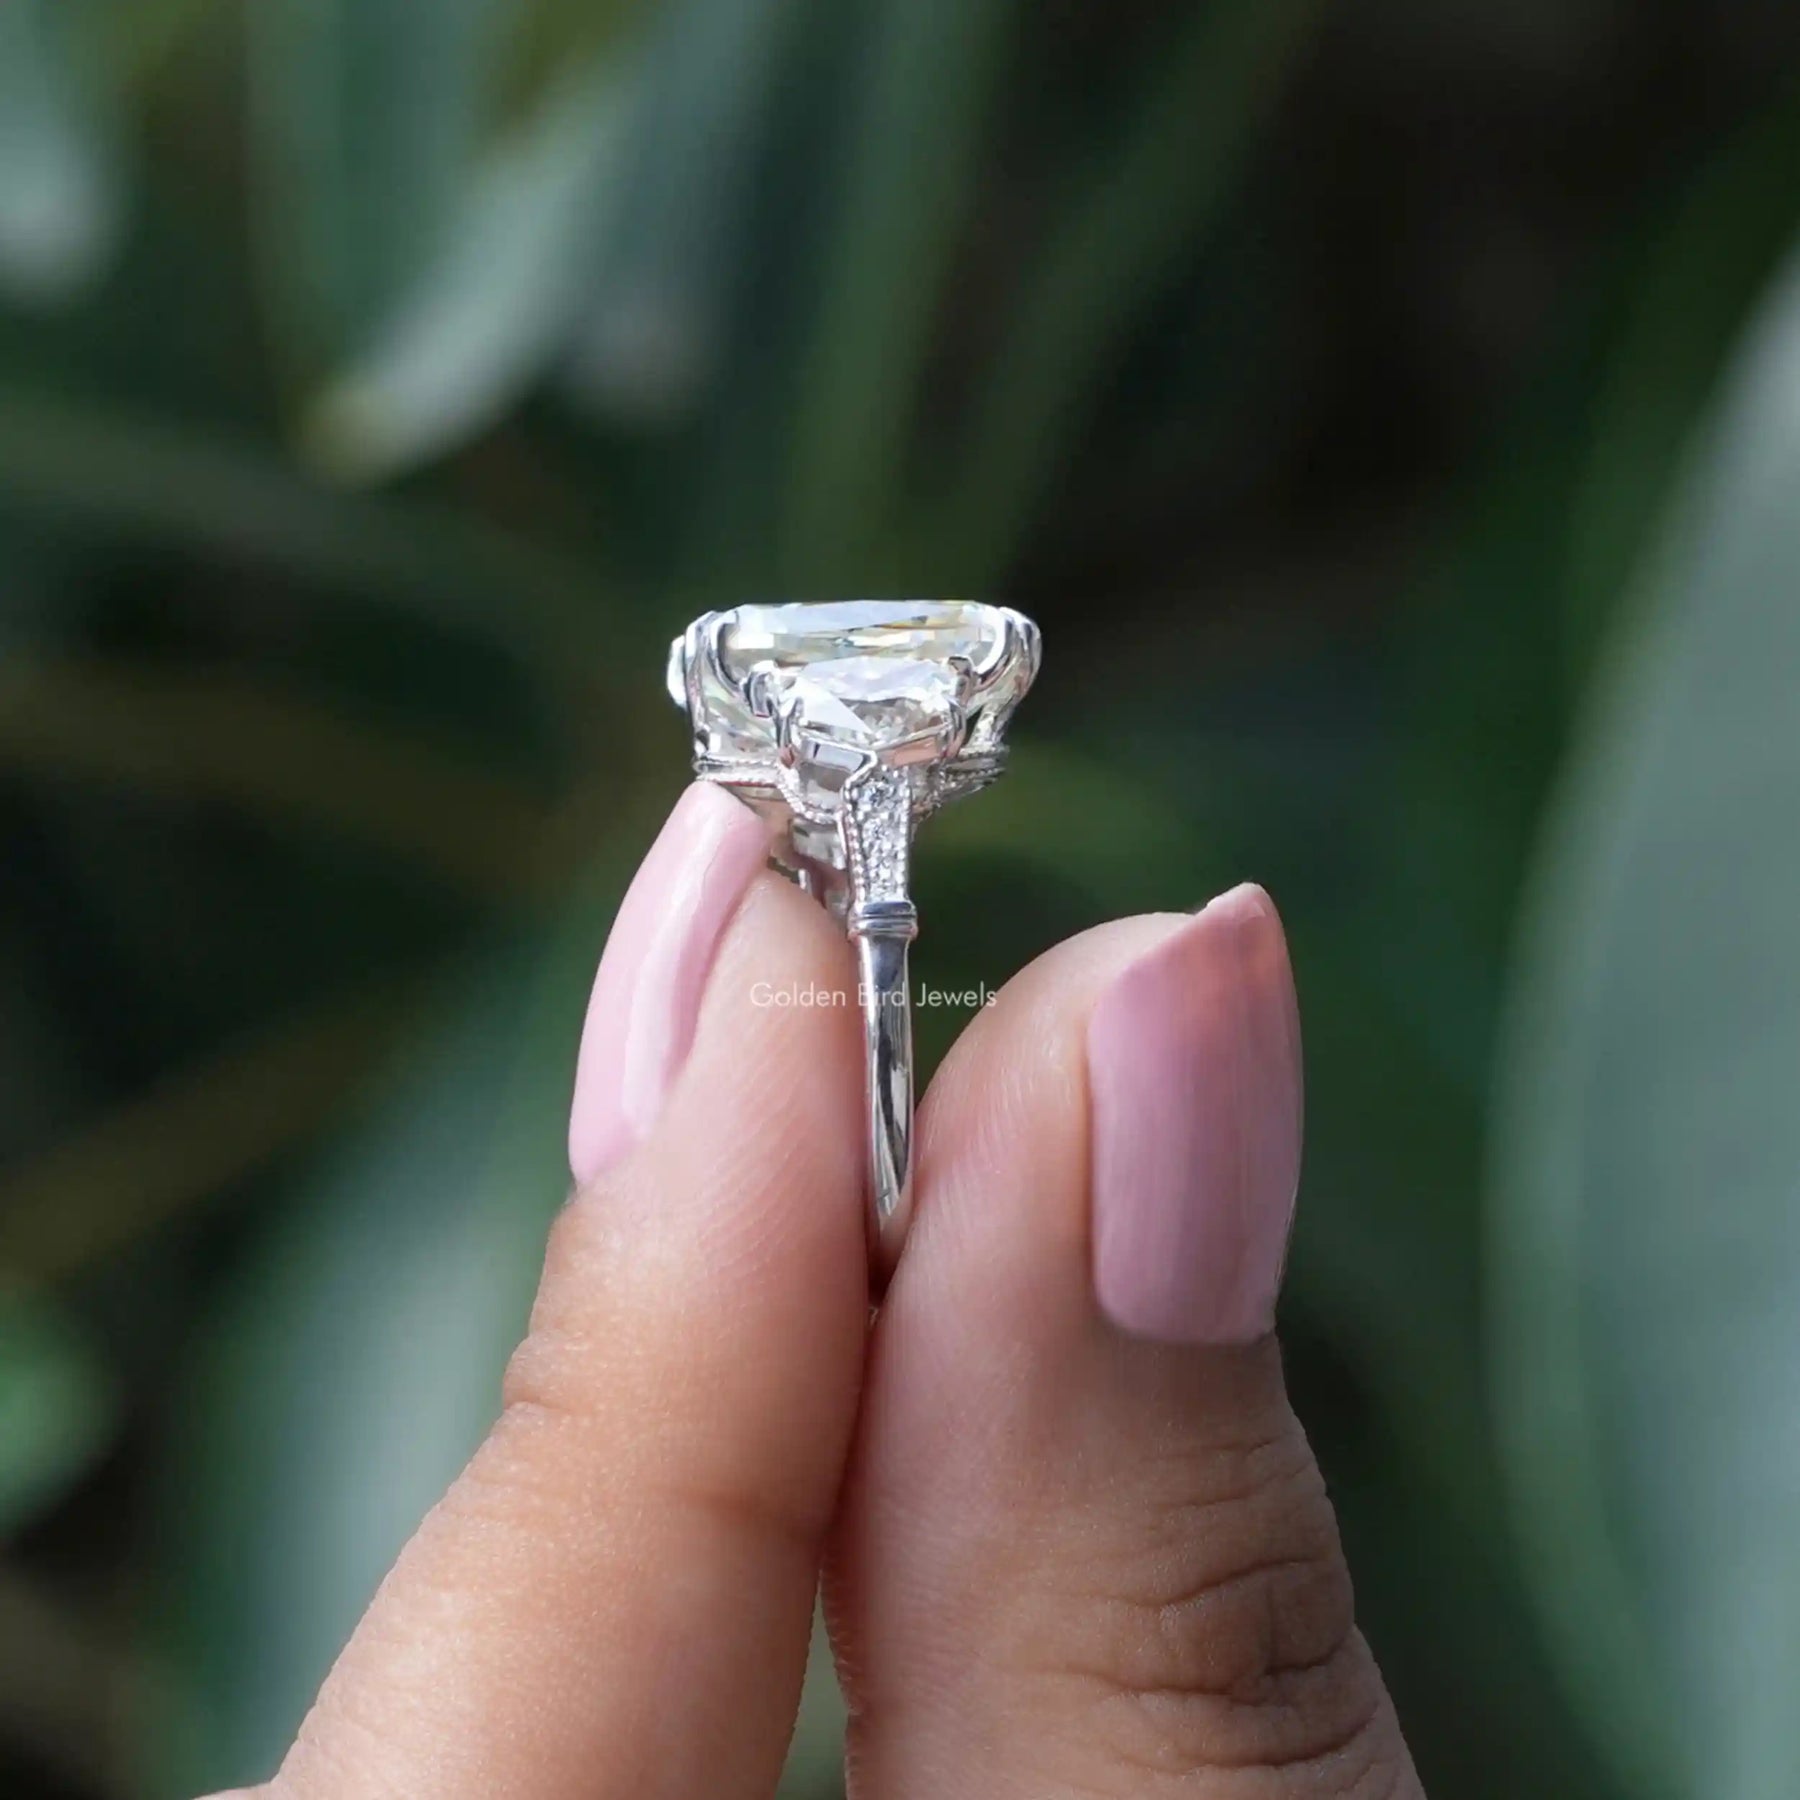 [Side view of old mine cushion cut moissanite ring in 14k yellow gold]-[Golden Bird Jewels]